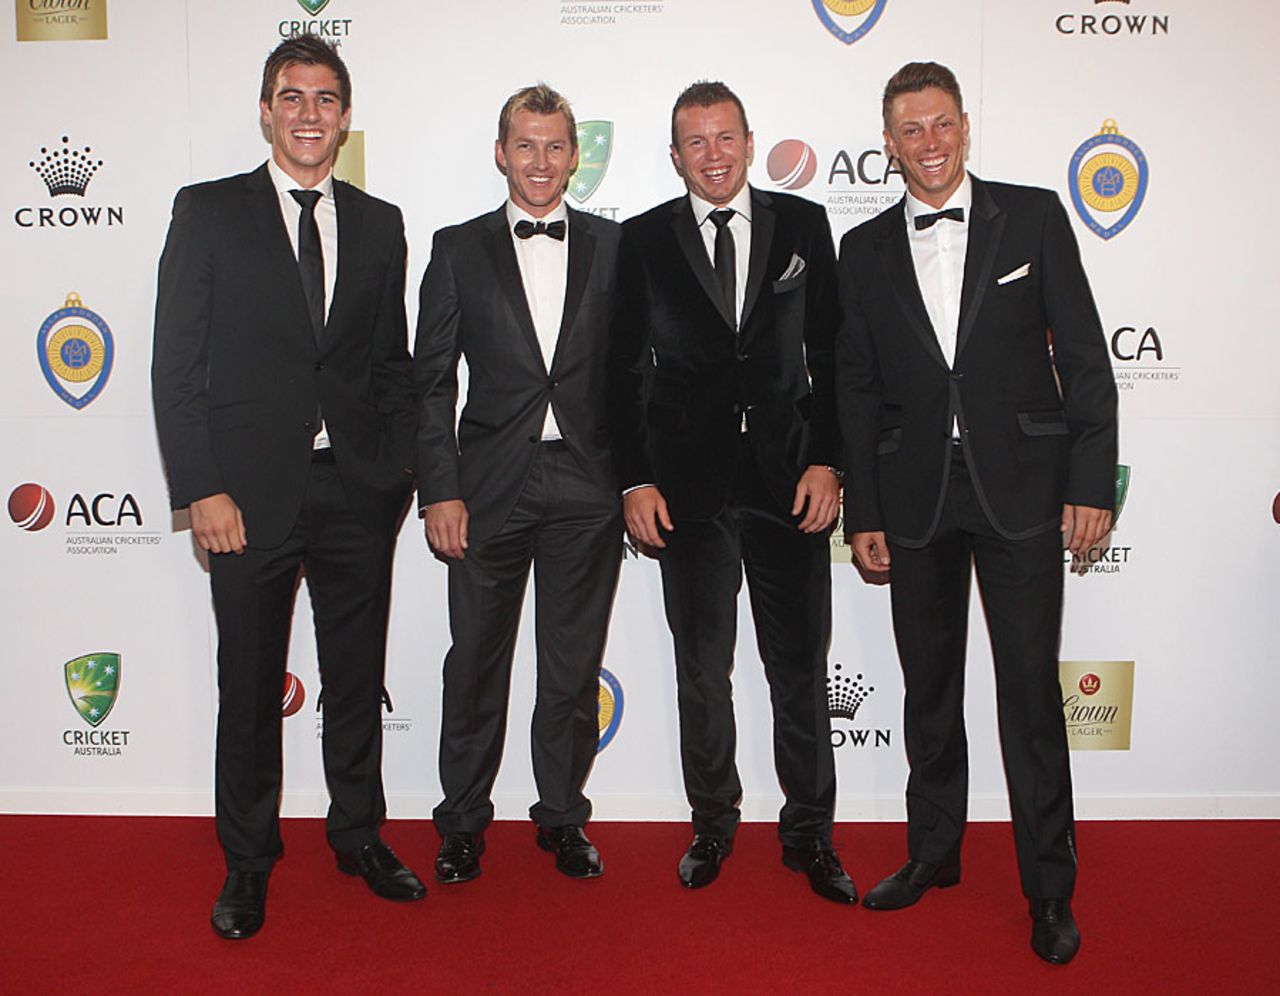 Pat Cummins, Brett Lee, Peter Siddle and James Pattinson arrive at the 2012 Allan Border Medal Awards, Melbourne, February 27, 2012 